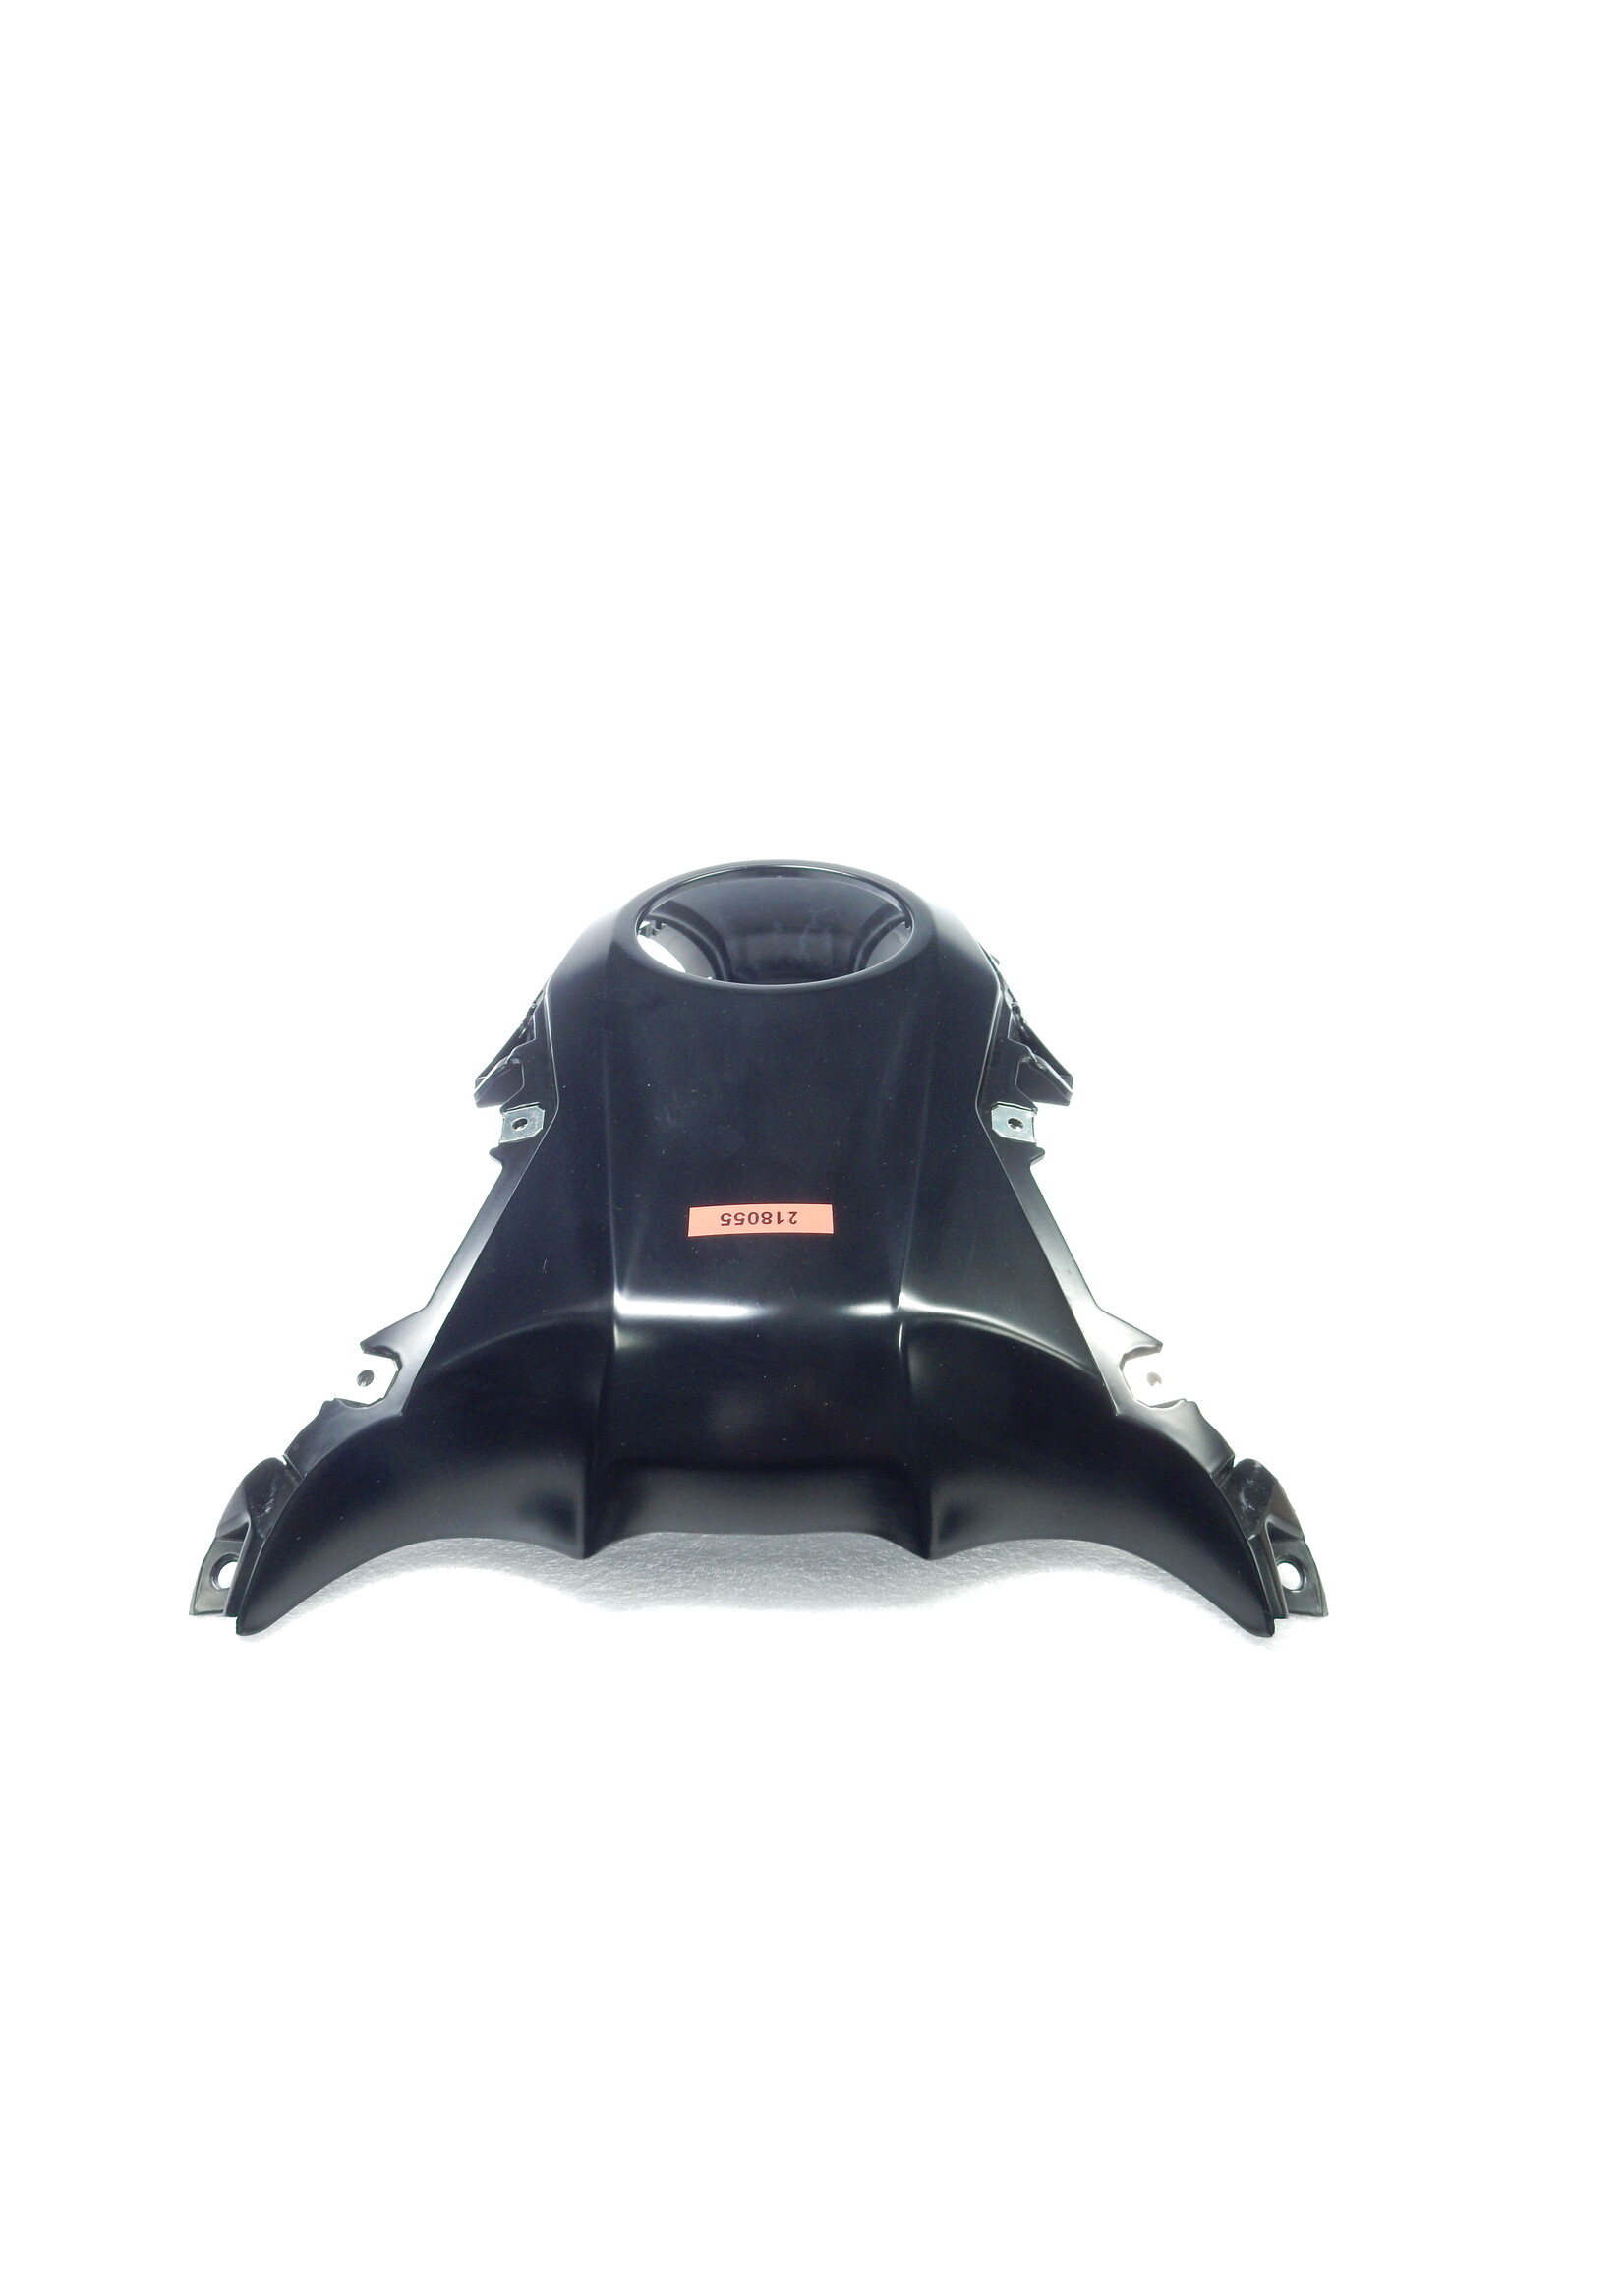 BMW BMW R 1250 RS Tank cover, middle black-storm met. / 46638525027 / 46638534309